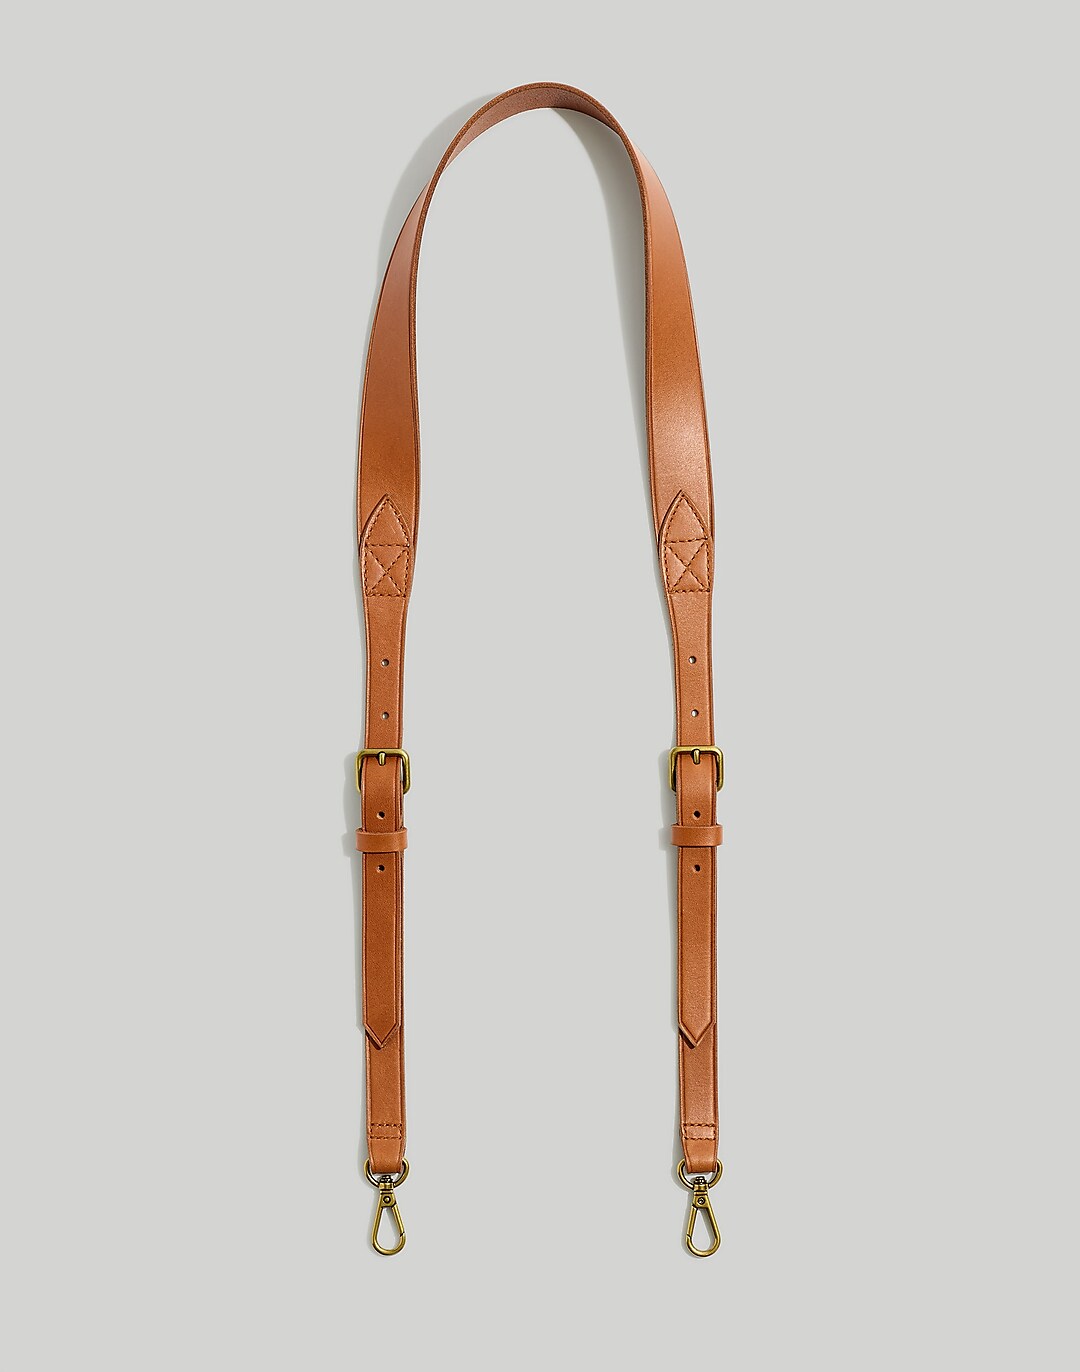 Check and Leather Bag Strap in Tan - Women